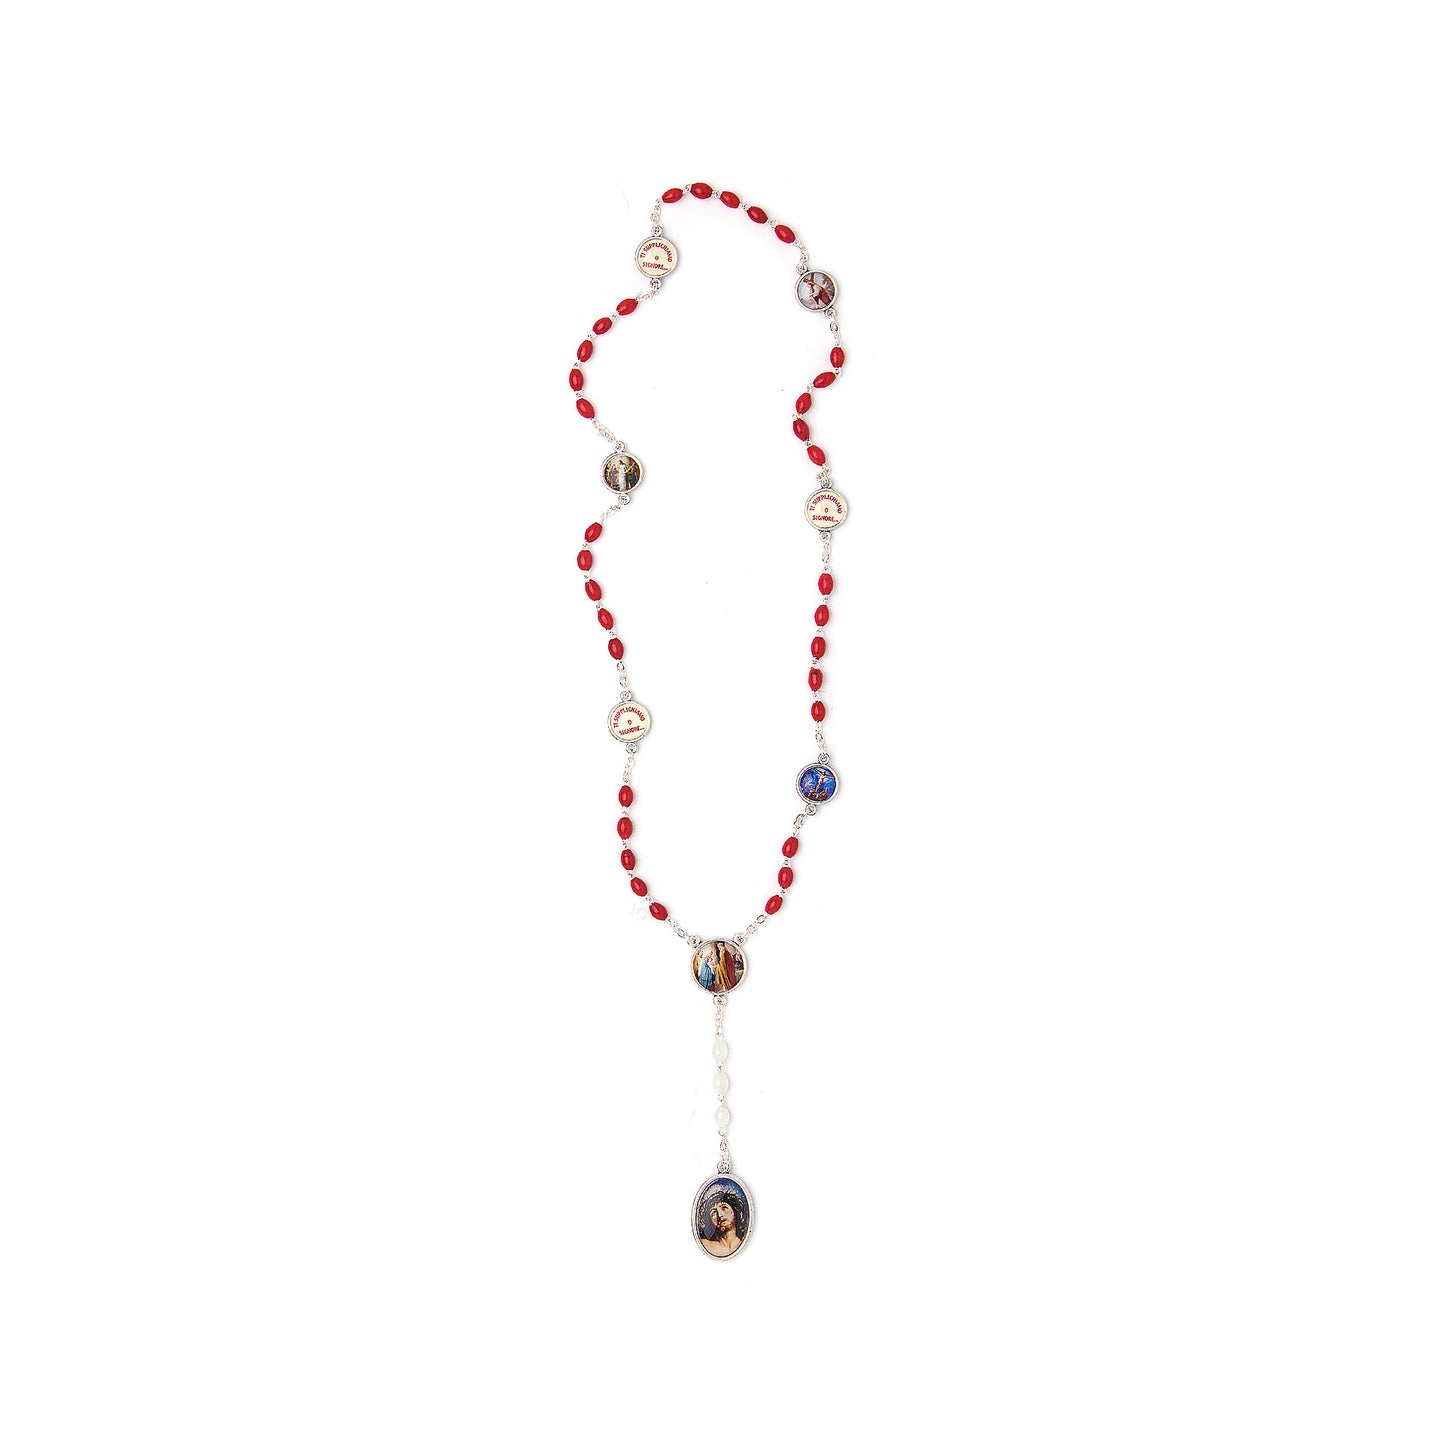 Preciosa Blood Rosary with Mother of Pearl Beads in Red